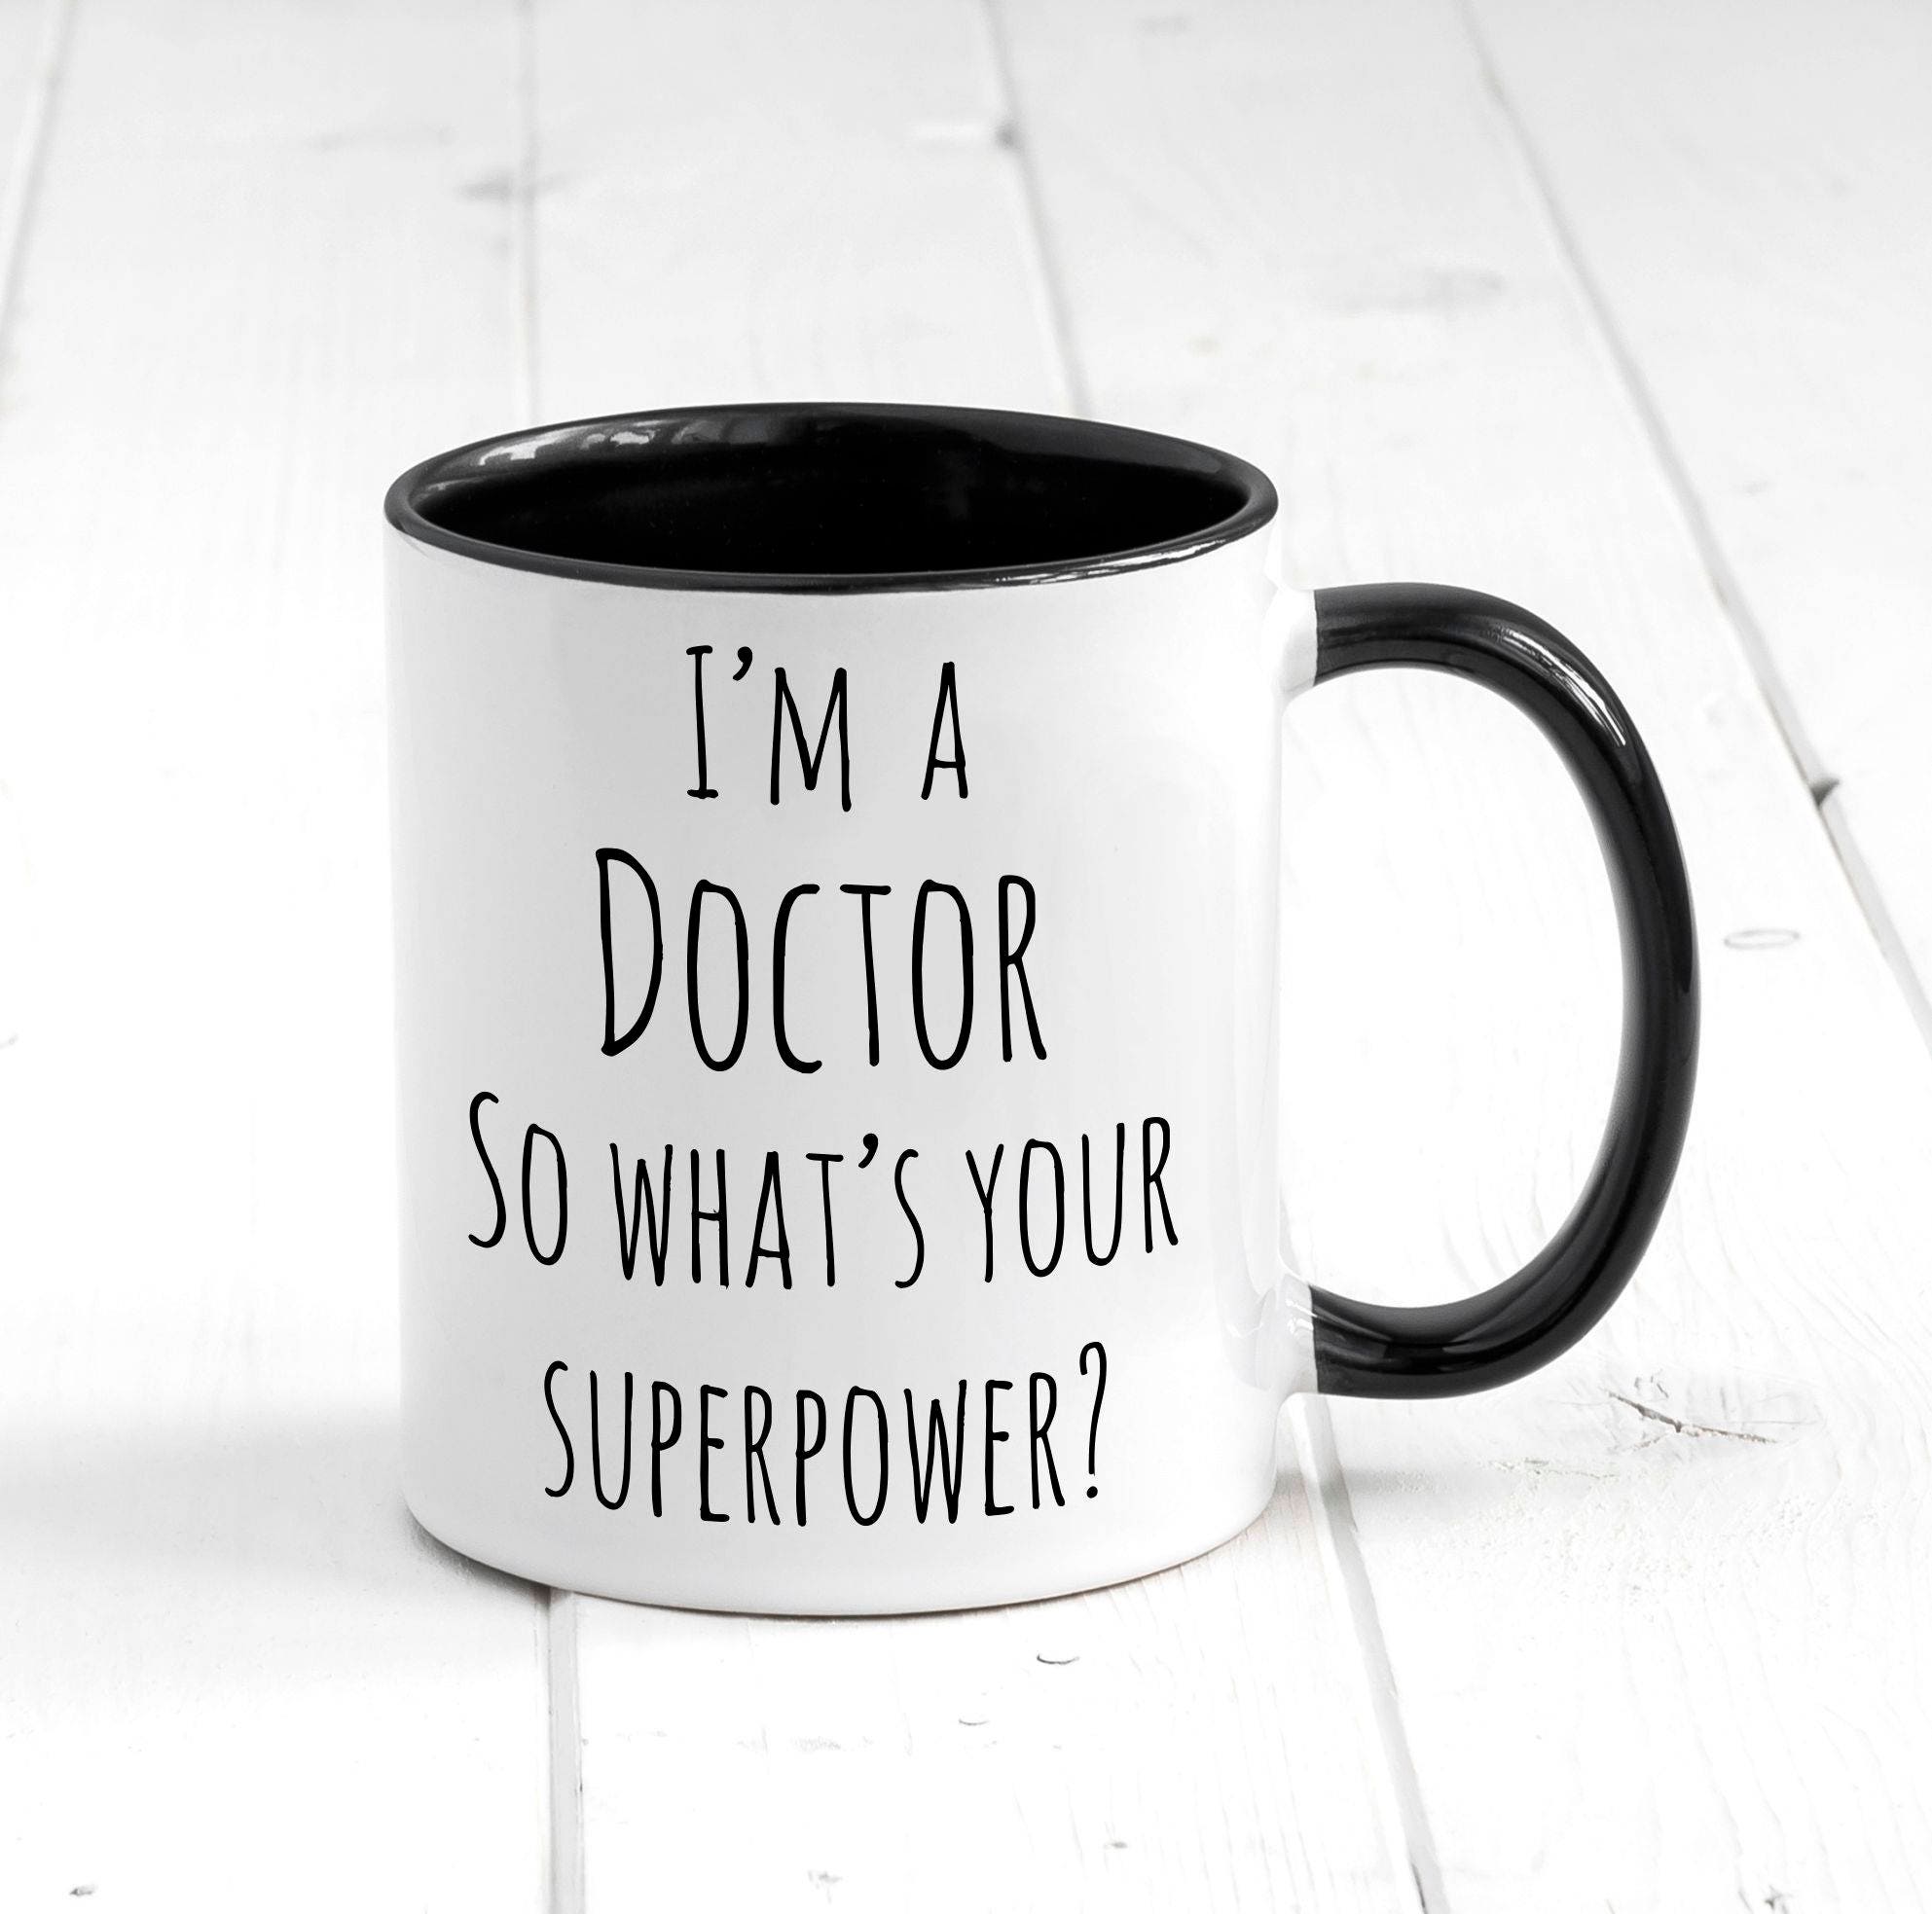 Can you fix my. Кружка get what you want. Dad can Fix everything Кружка. I'M A Doctor what's your Superpower? Veqtor stiker. So what is your Superpower.